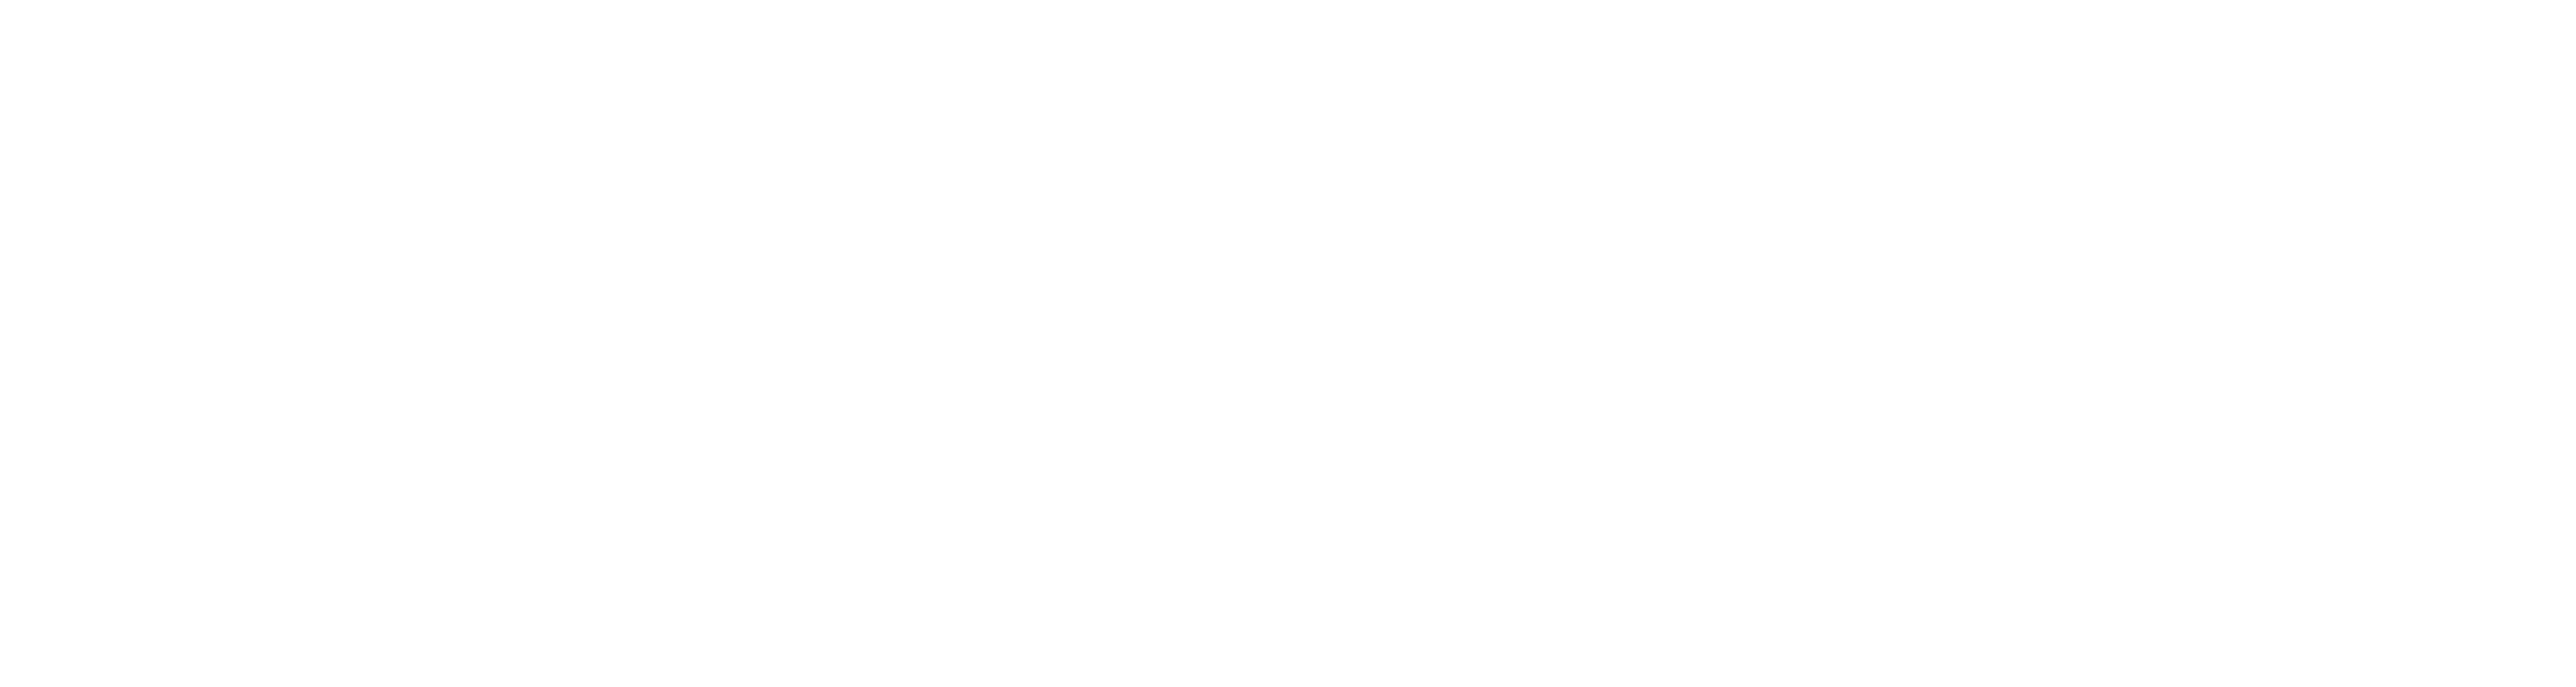 Hacklers_PullQuote.png